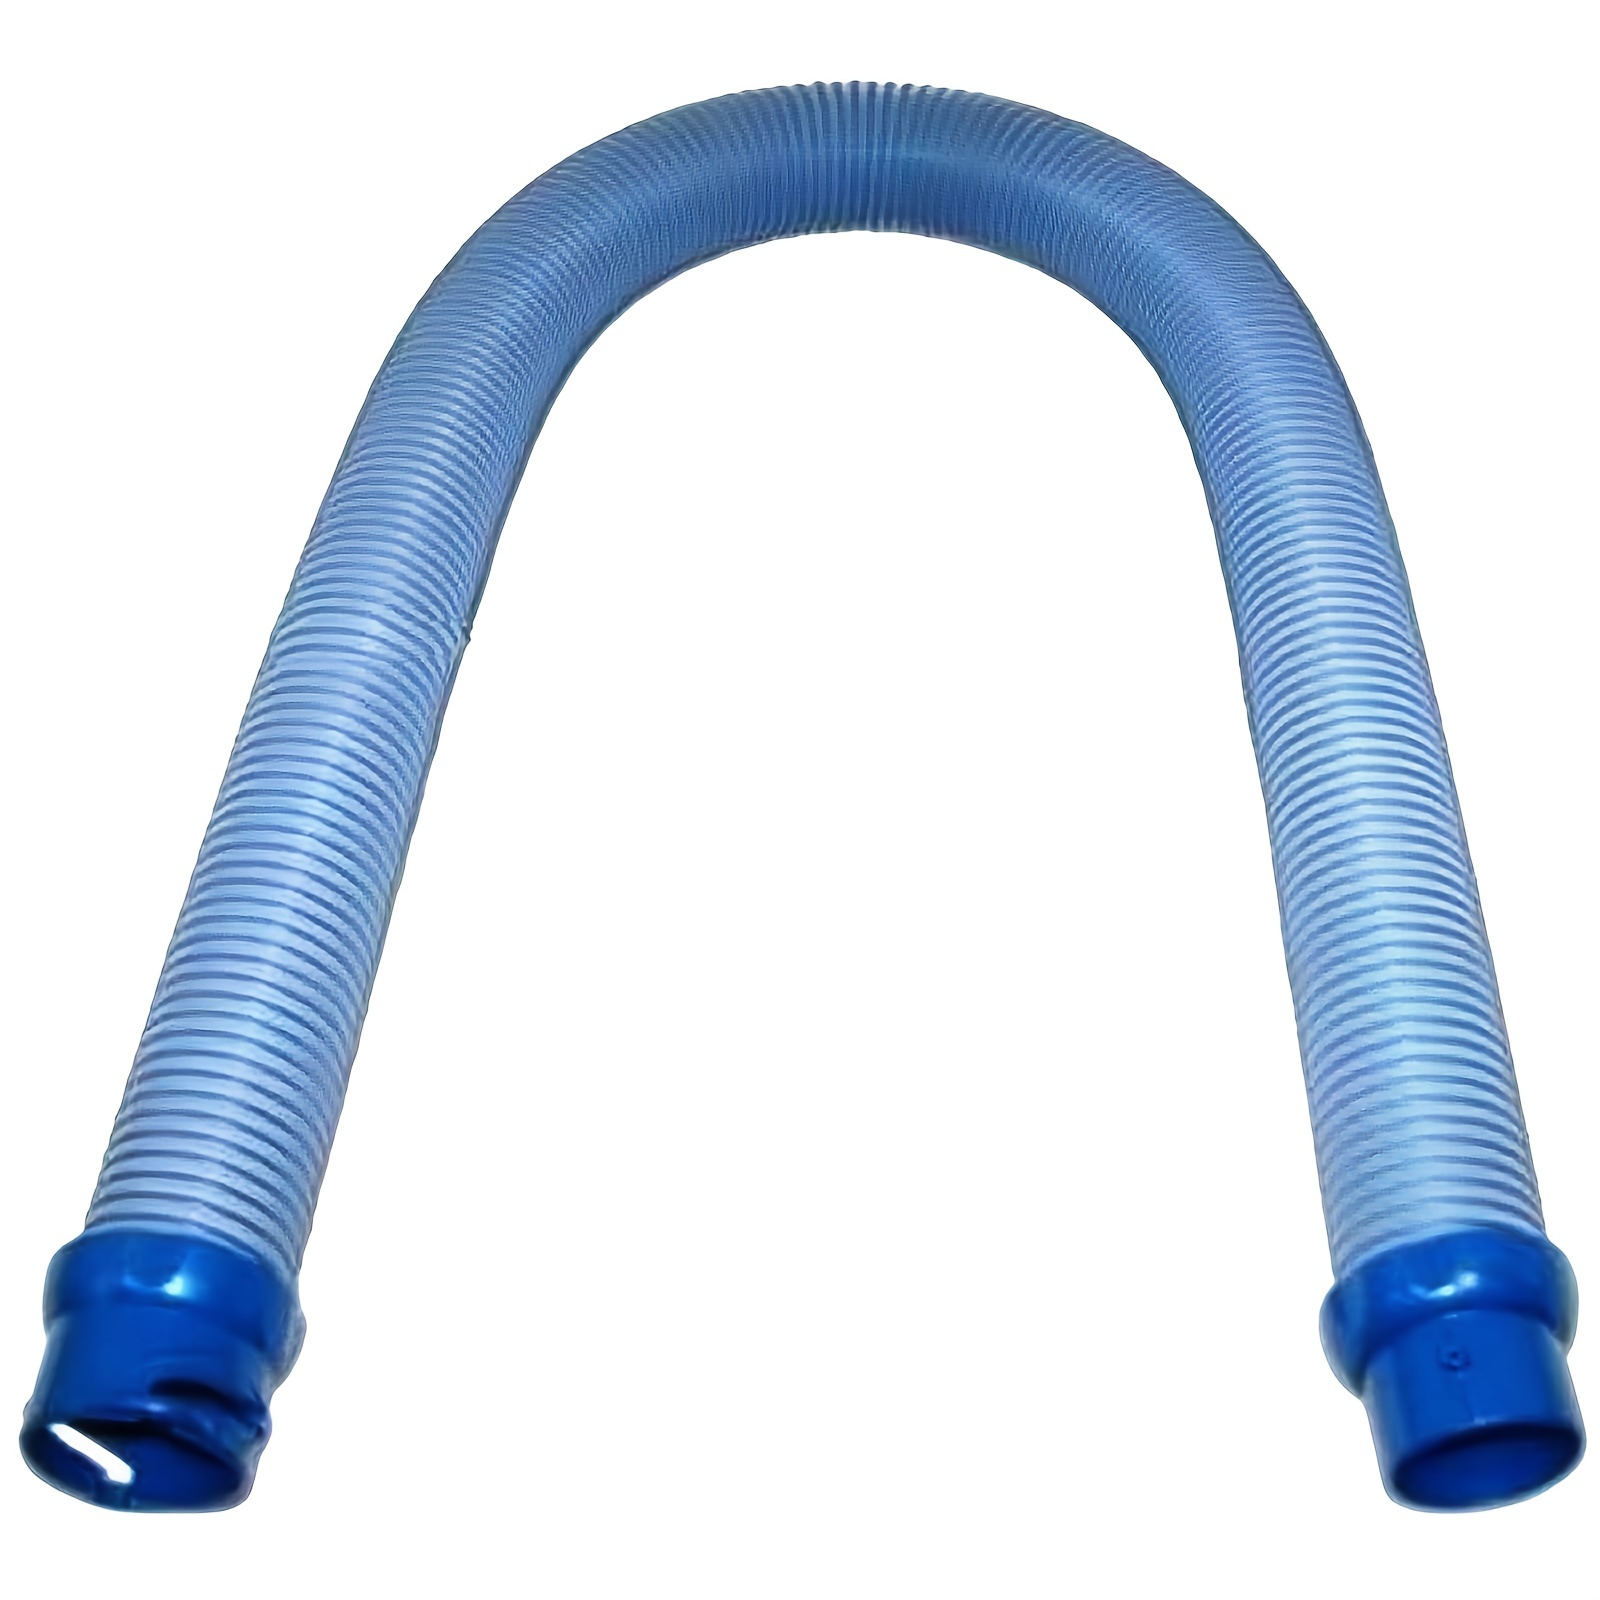 Mx6 Mx8 Pool Cleaner Lock Hose Replacement Kit Pool Cleaner Hose Small Hose 1M Twist Lock Hose R0527700 Blue